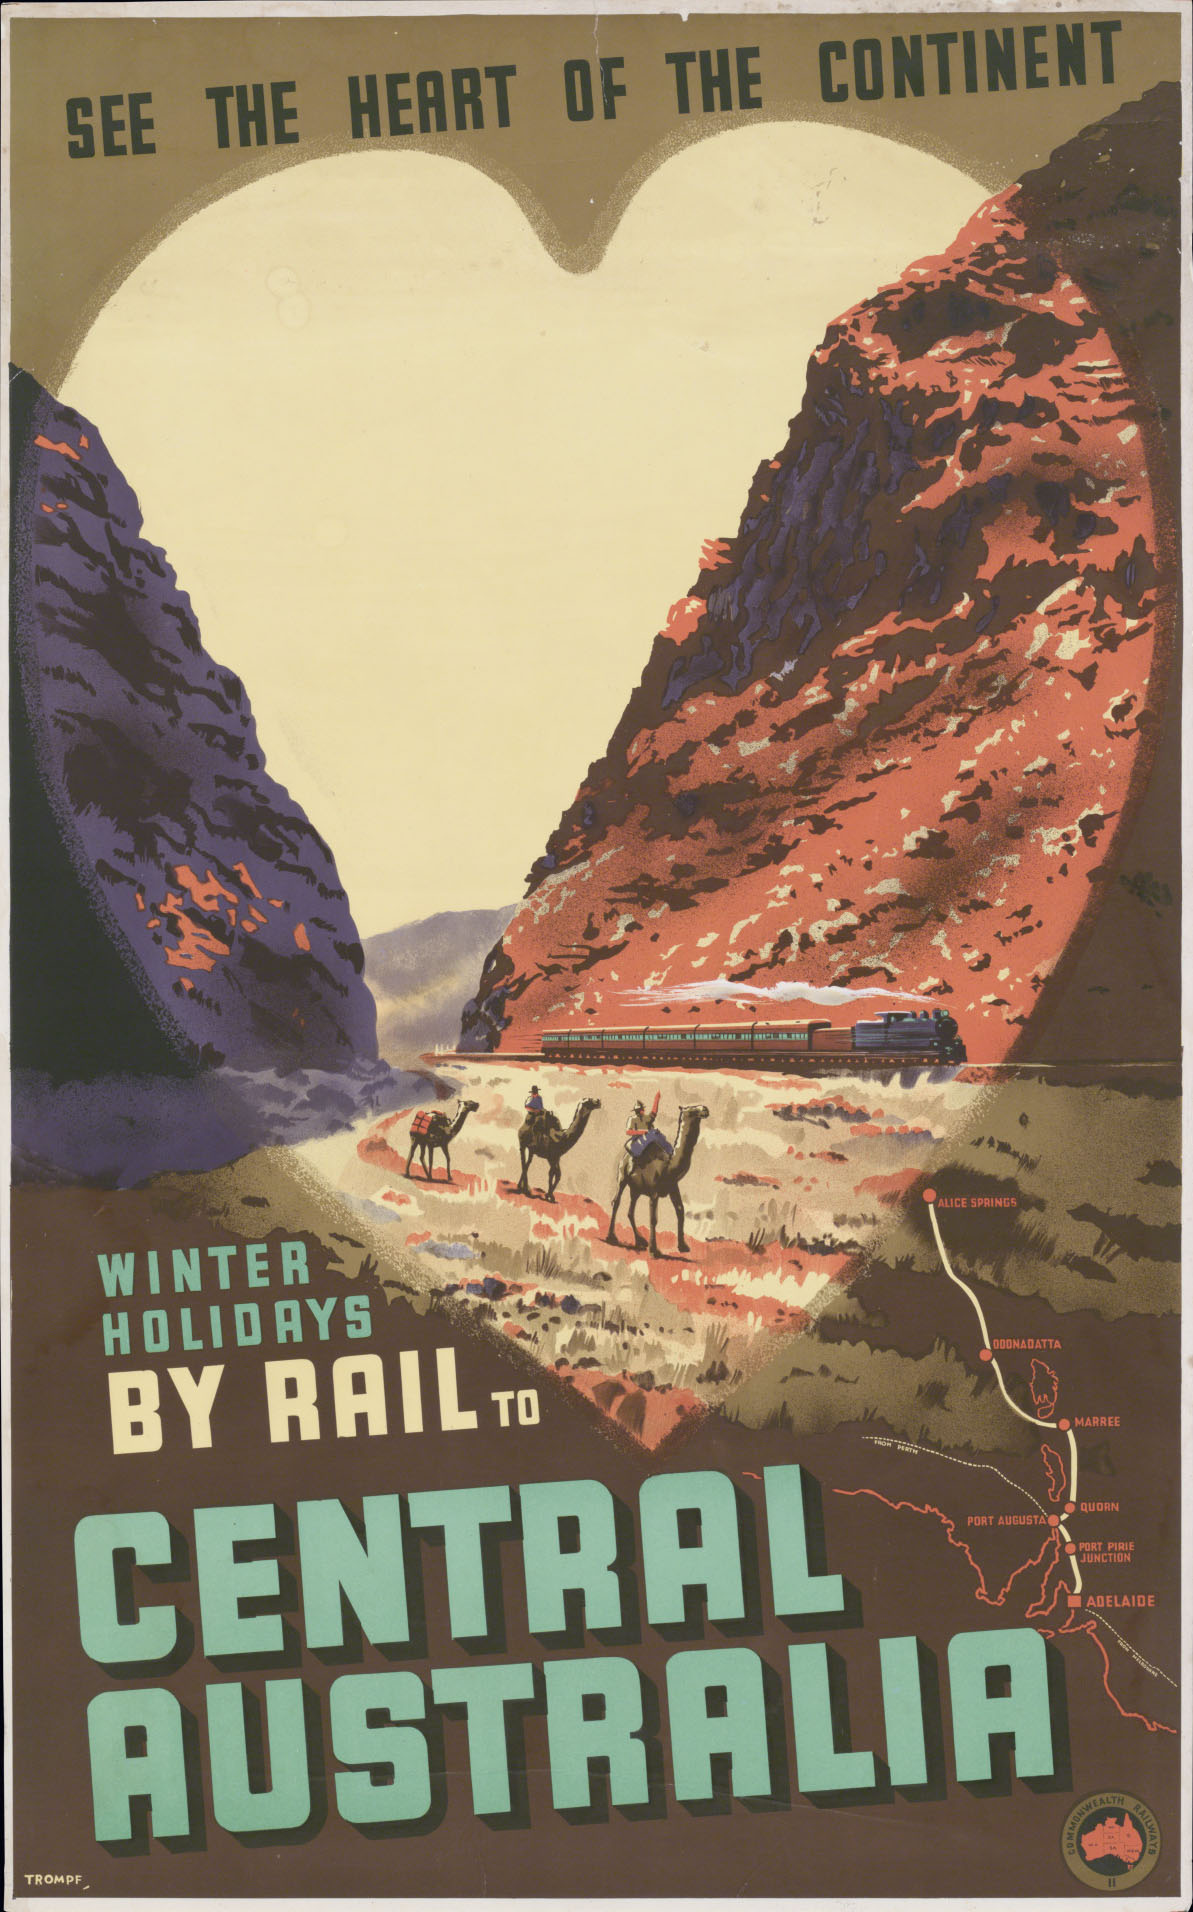 Poster advertising rail travel. ‘See the heart of the continent’, 1930.